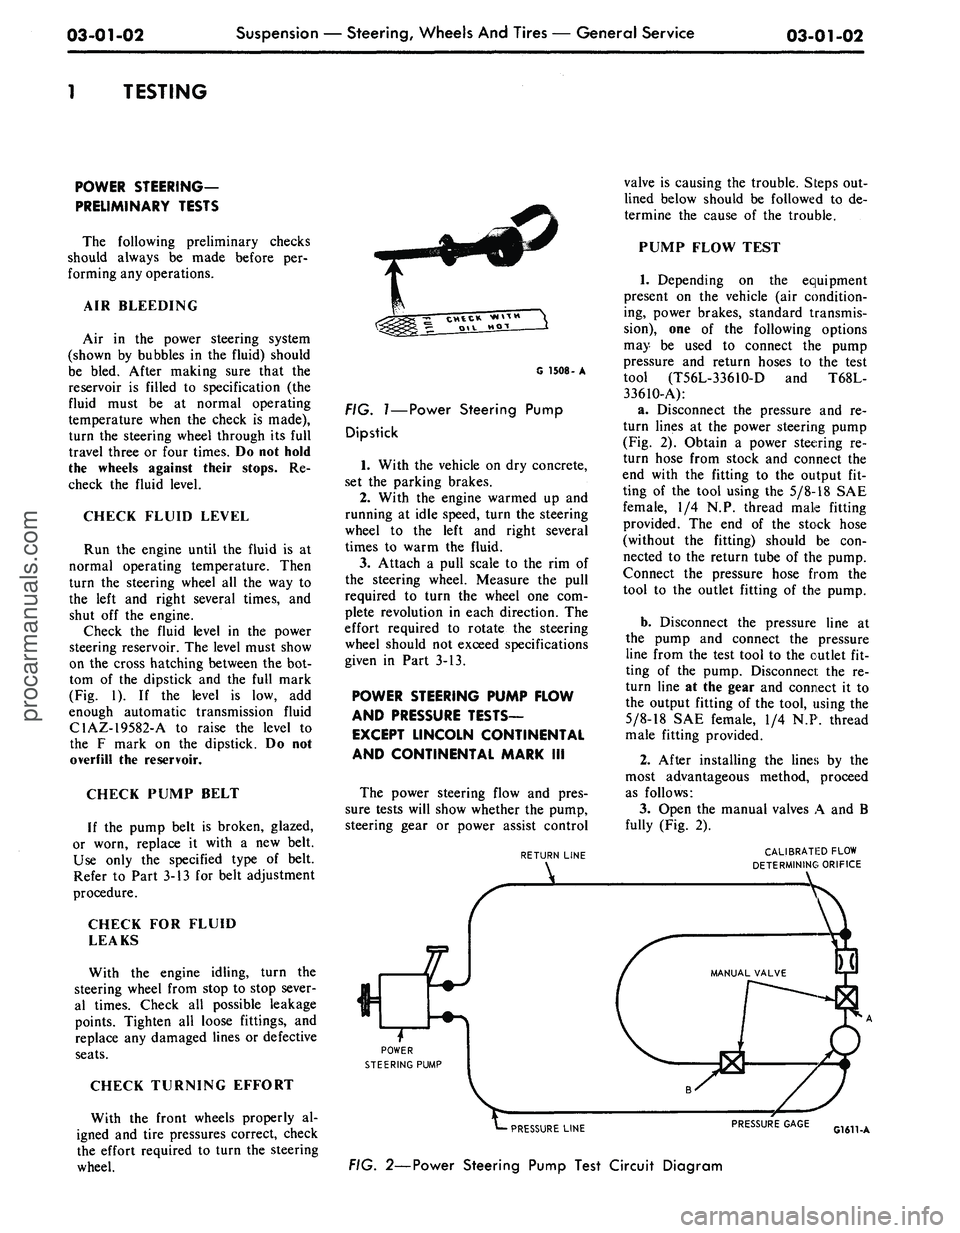 FORD MUSTANG 1969  Volume One Chassis 
03-01-02 
Suspension — Steering, Wheels And Tires — General Service

03-01-02

1 TESTING

POWER STEERING-

PRELIMINARY TESTS

The following preliminary checks

should always be made before per-

